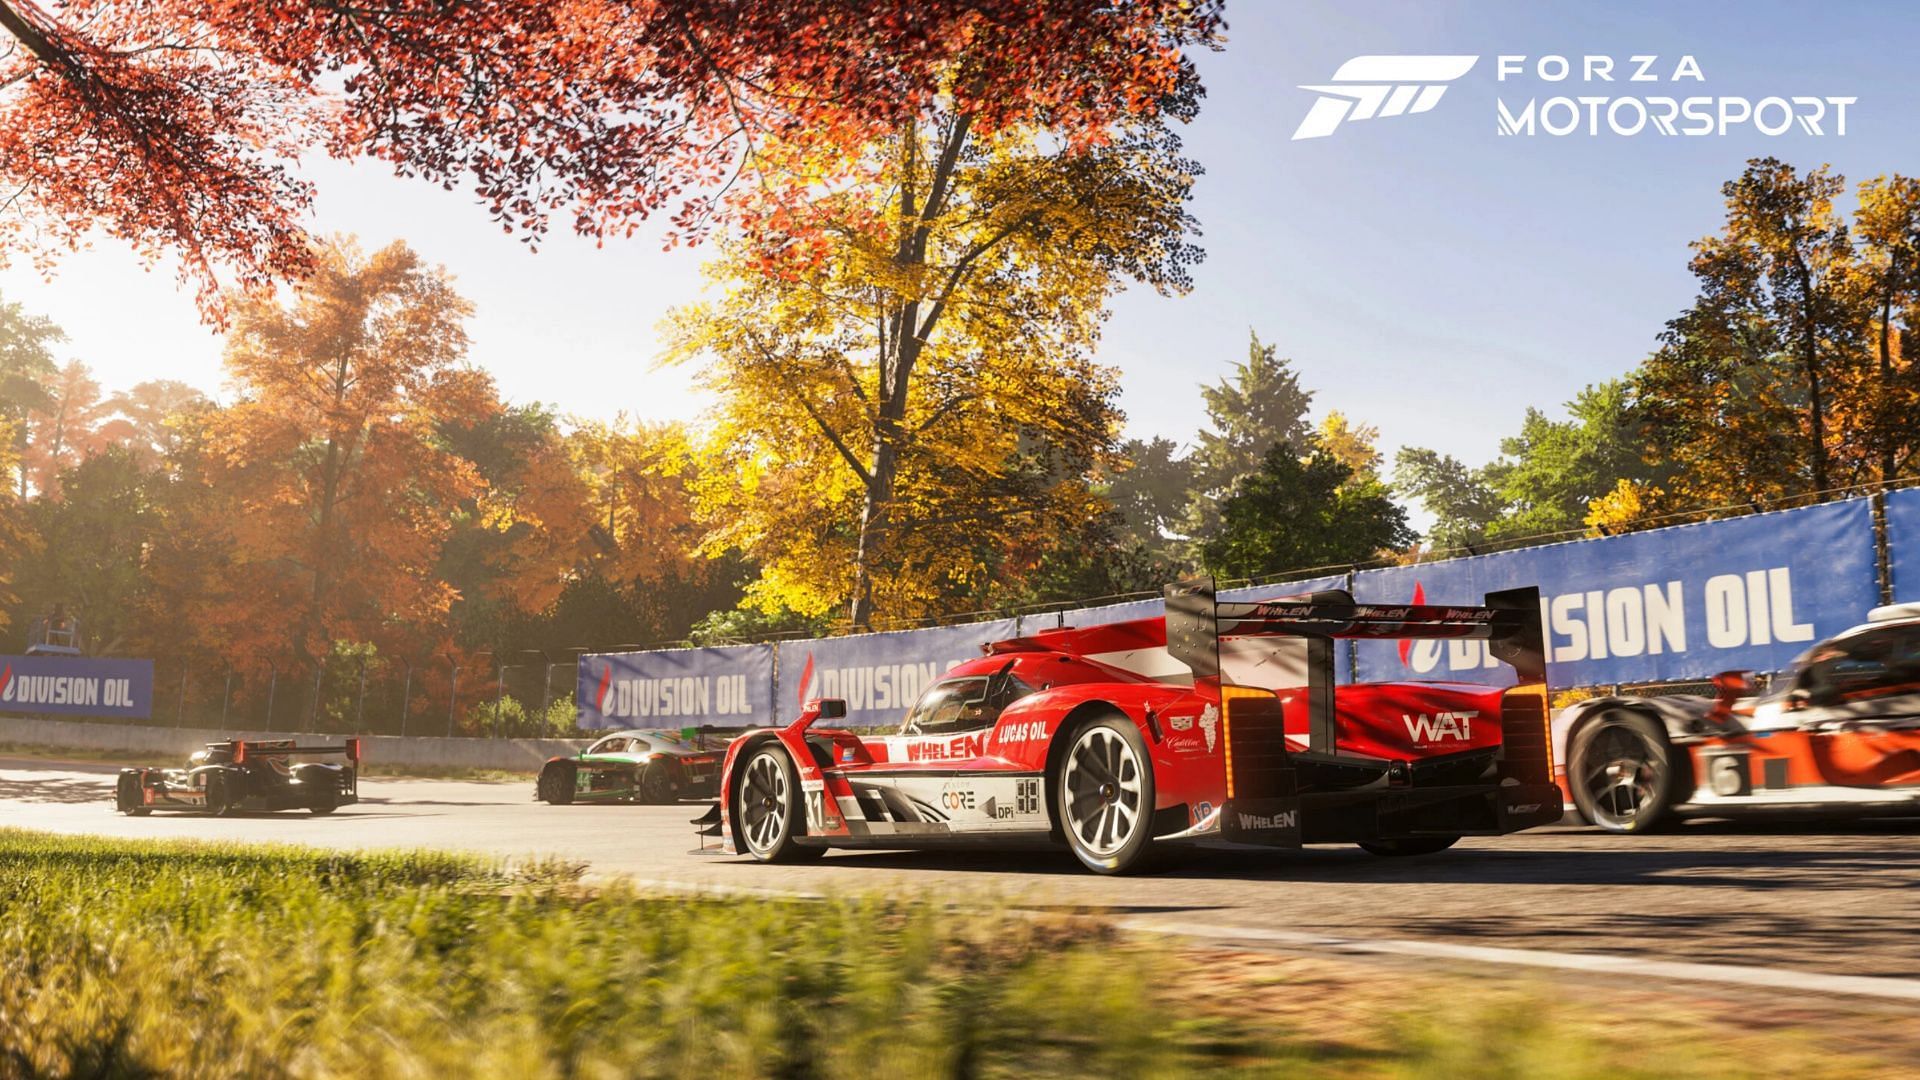 Forza Motorsport 2023 will introduce a range of innovative gameplay features and an extensive array of vehicles to choose from. (Image via Xbox Game Studios)